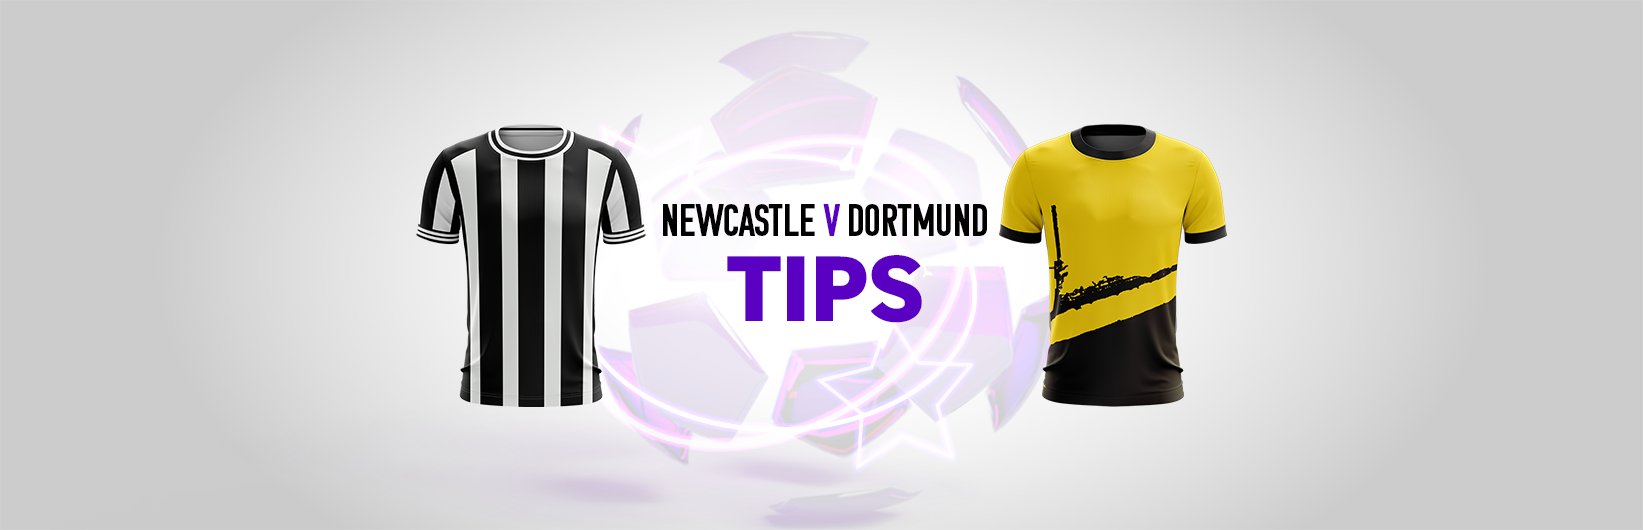 Champions League tips: Best bets for Newcastle v Dortmund